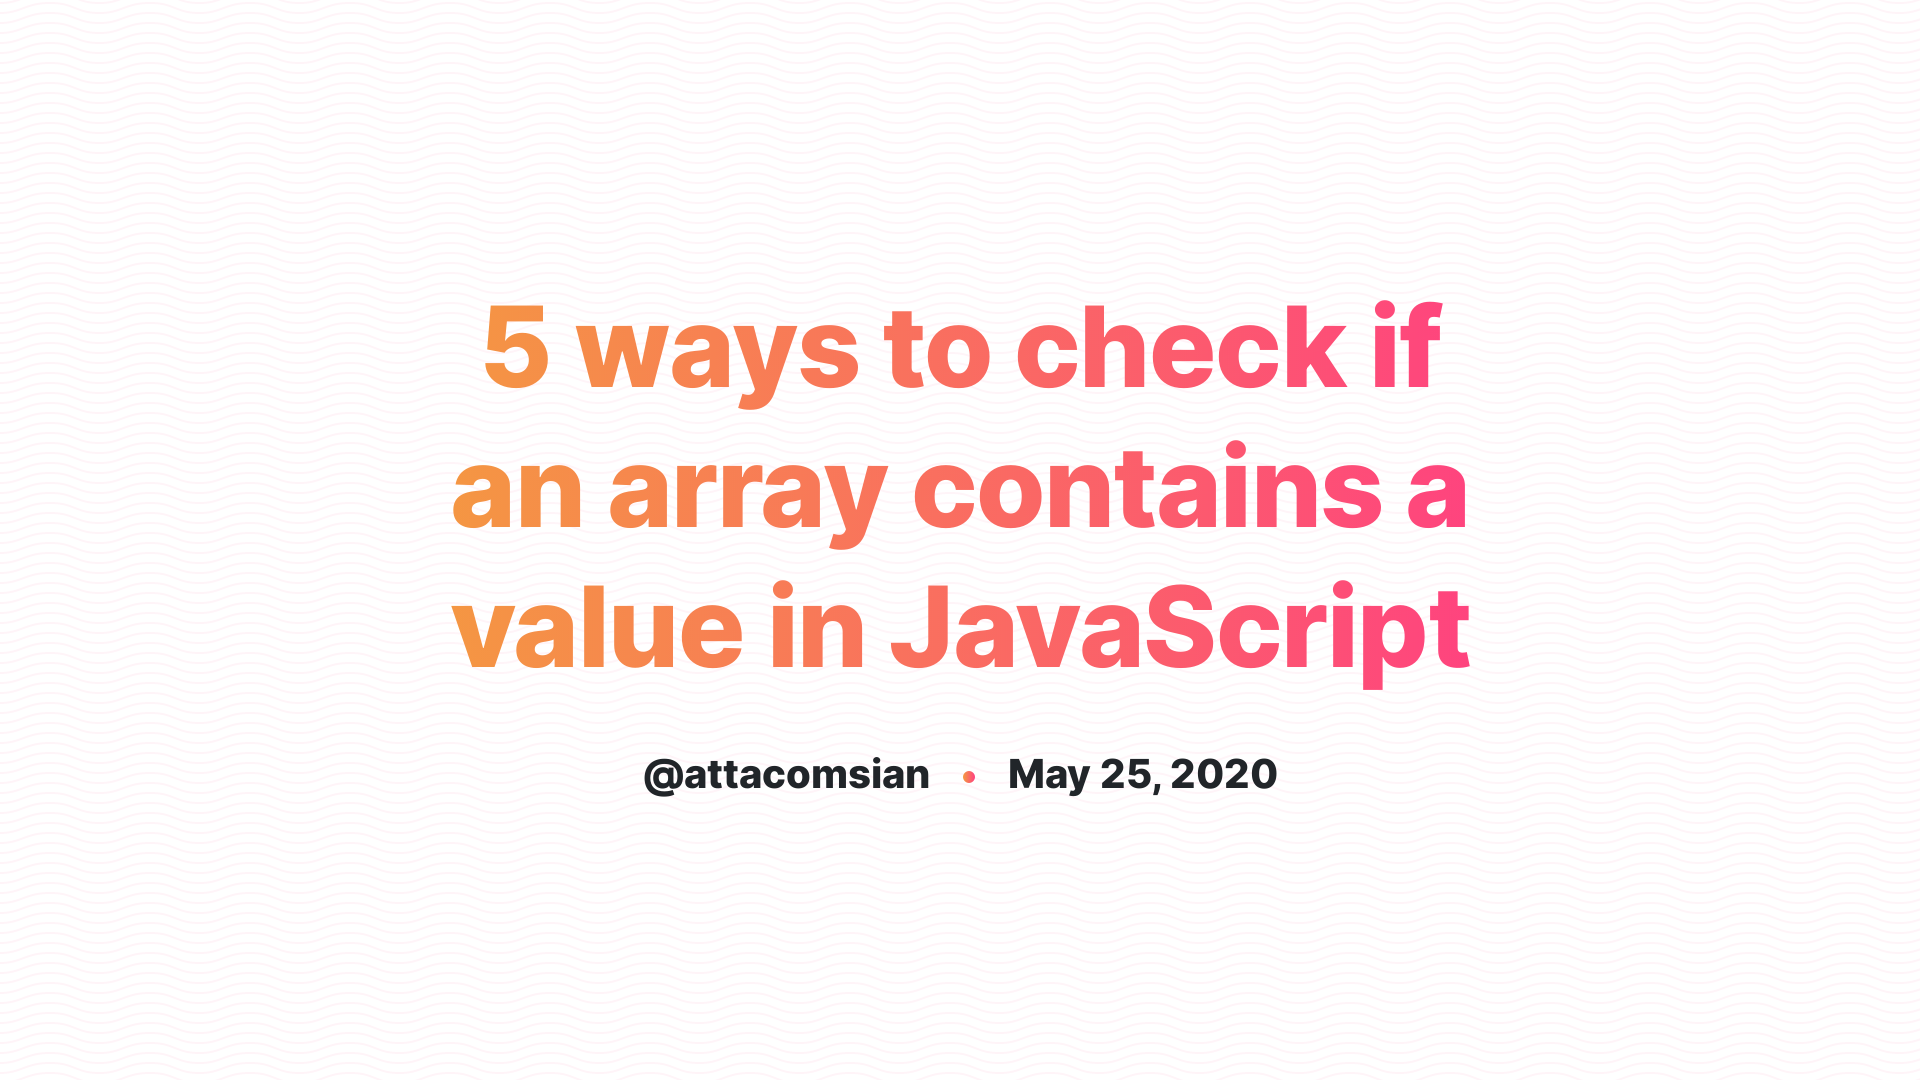 20 ways to check if an array contains a value in JavaScript